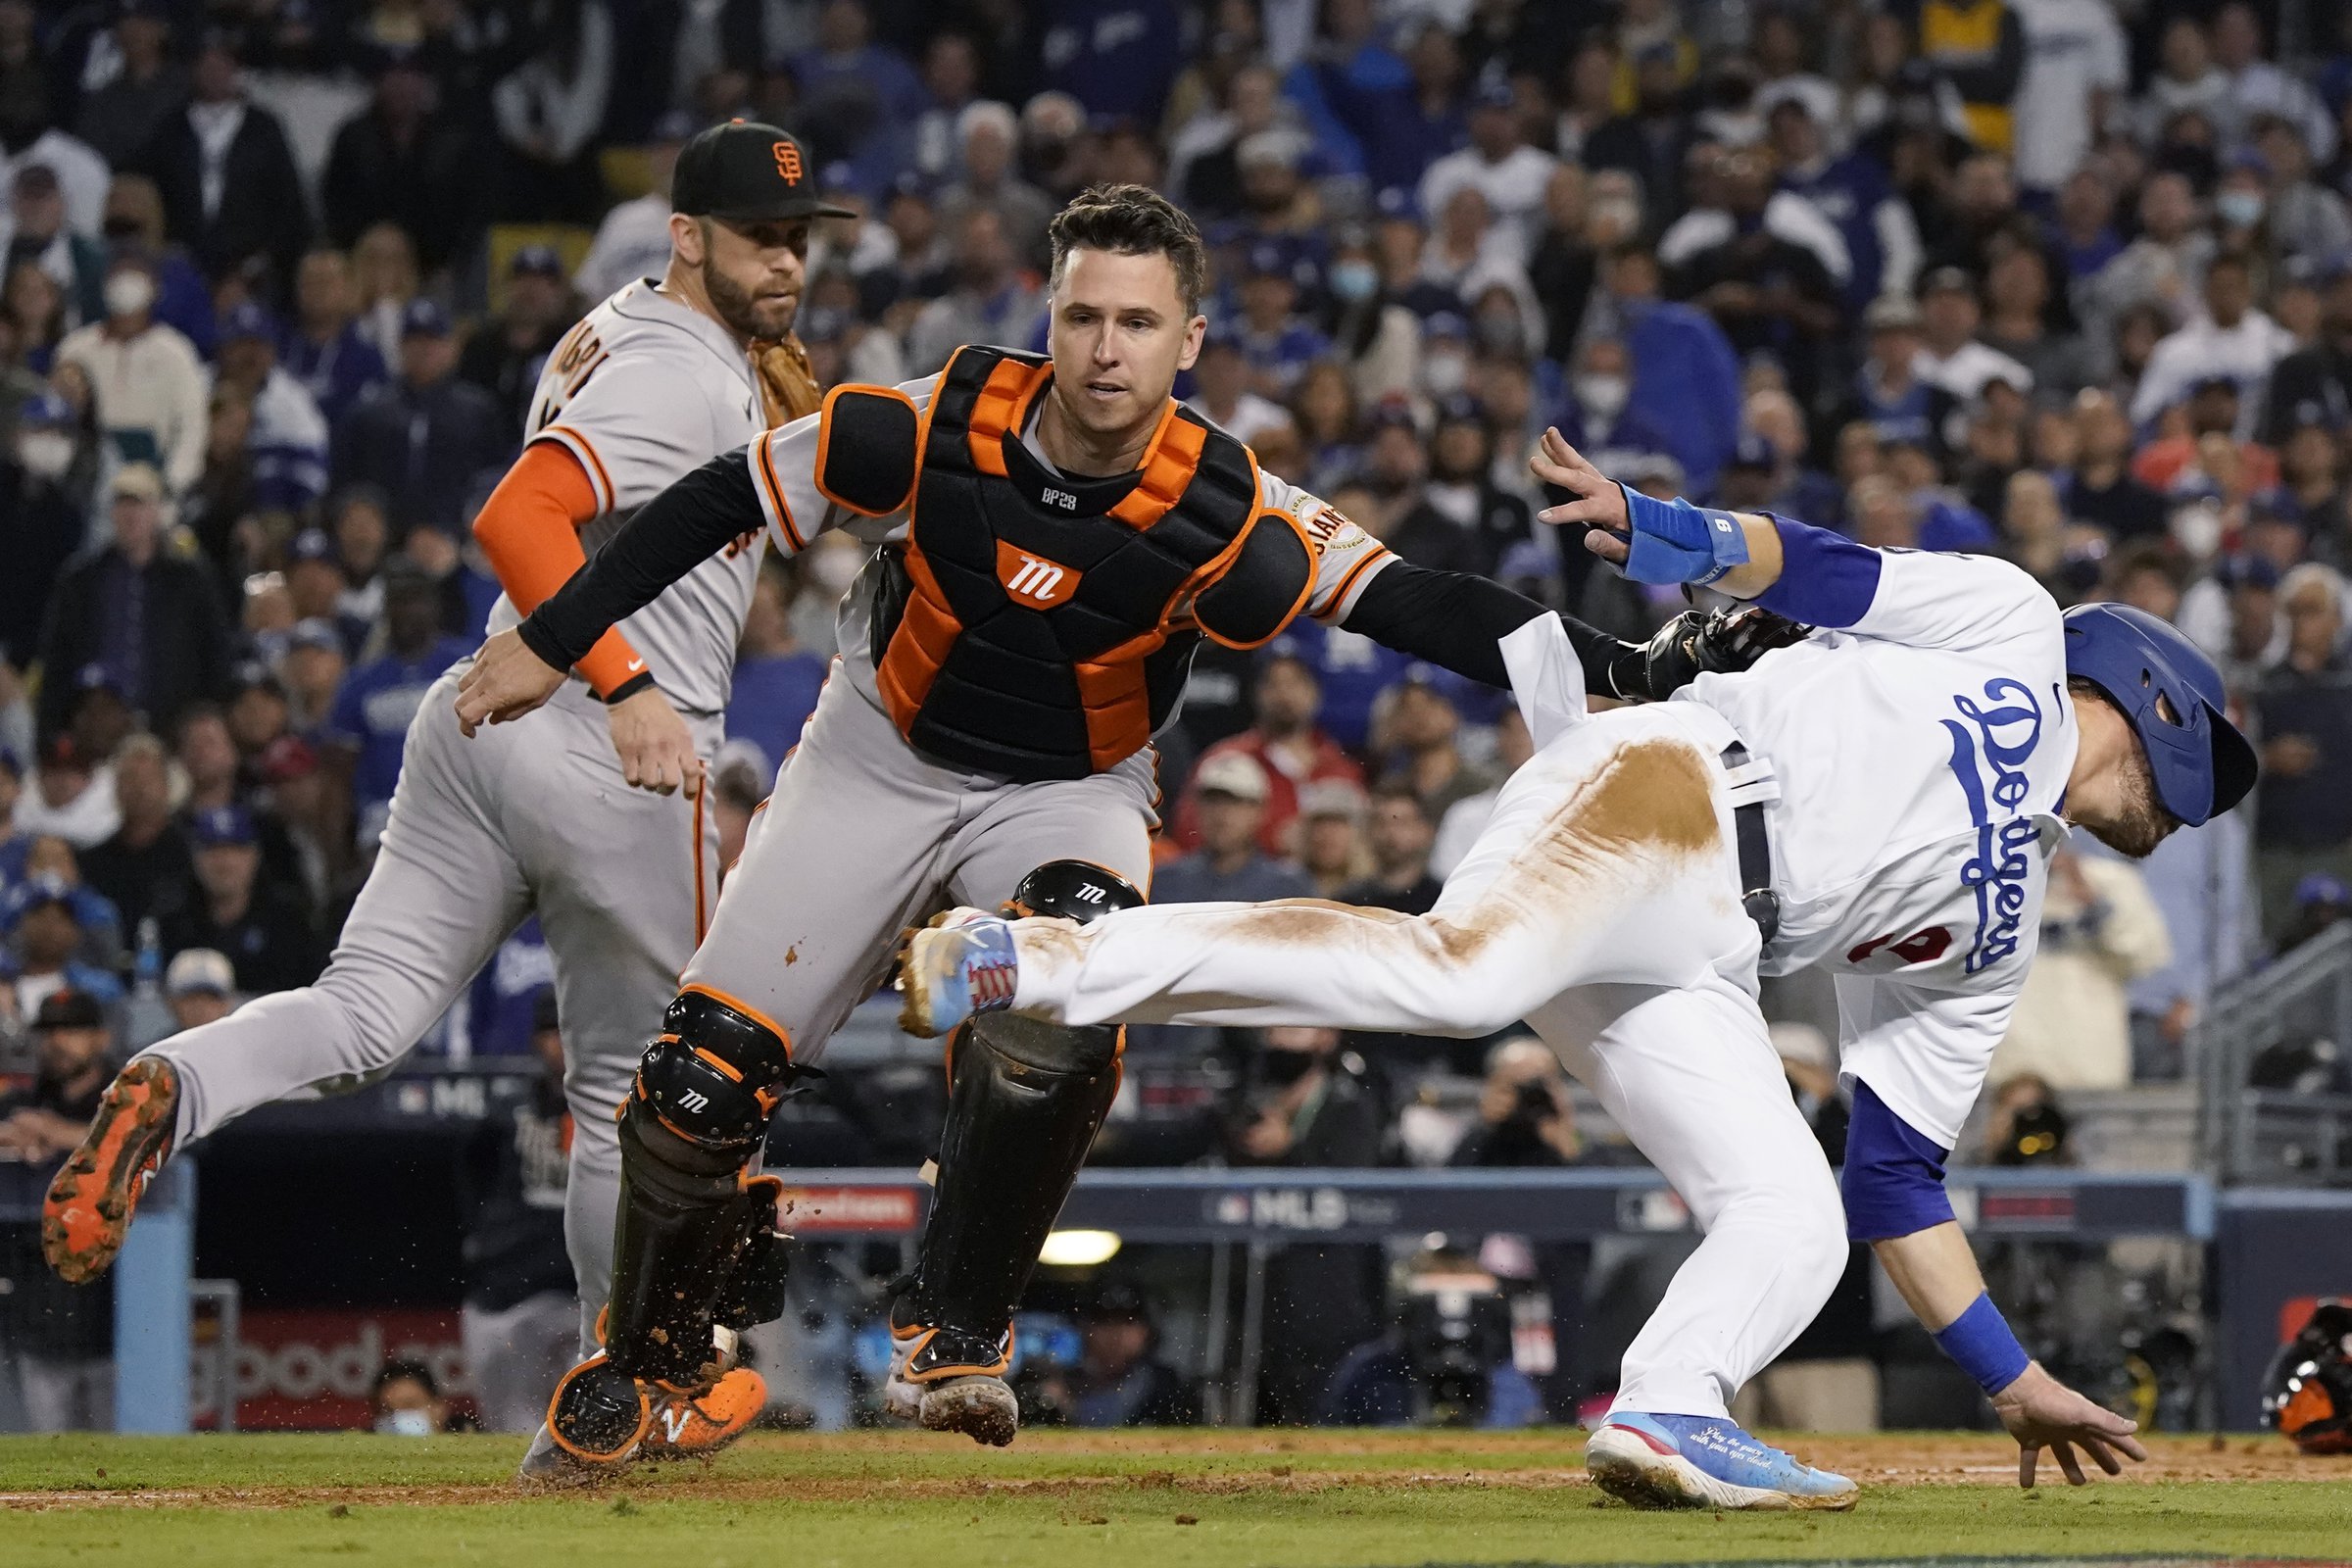 San Francisco Giants catcher Buster Posey voted All-Star starter